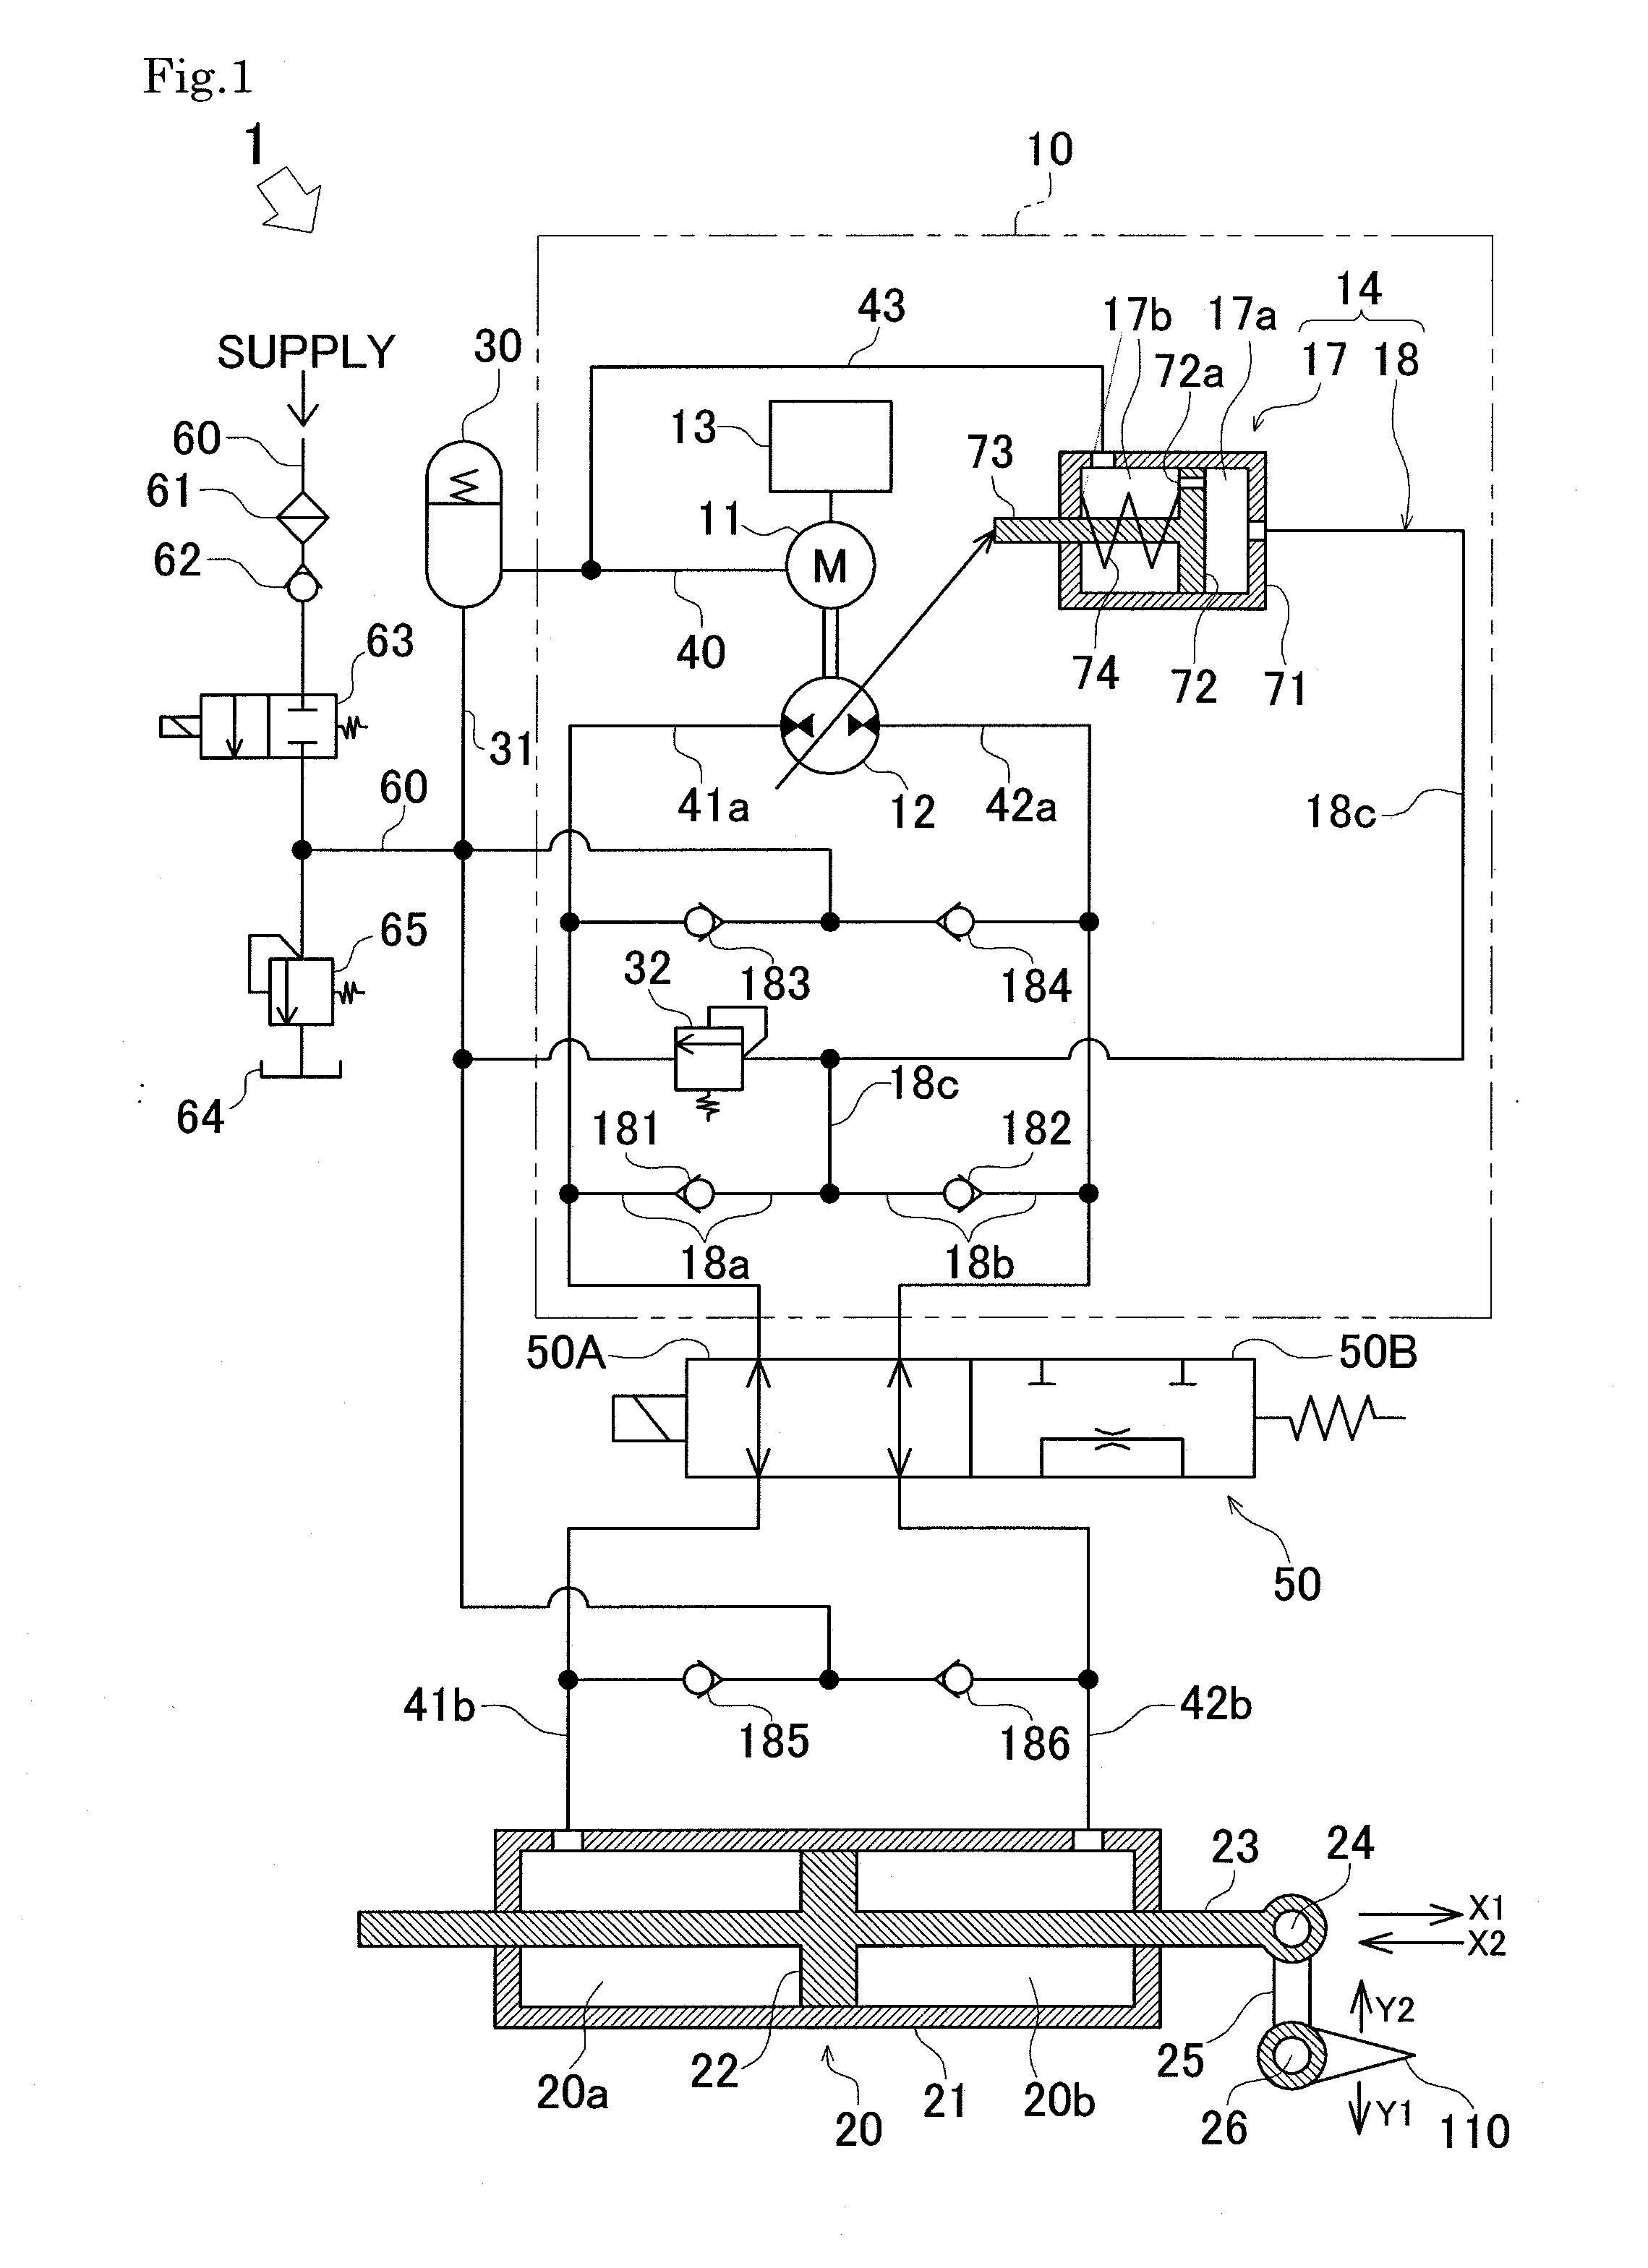 Hydraulic fluid supply device and electric actuator